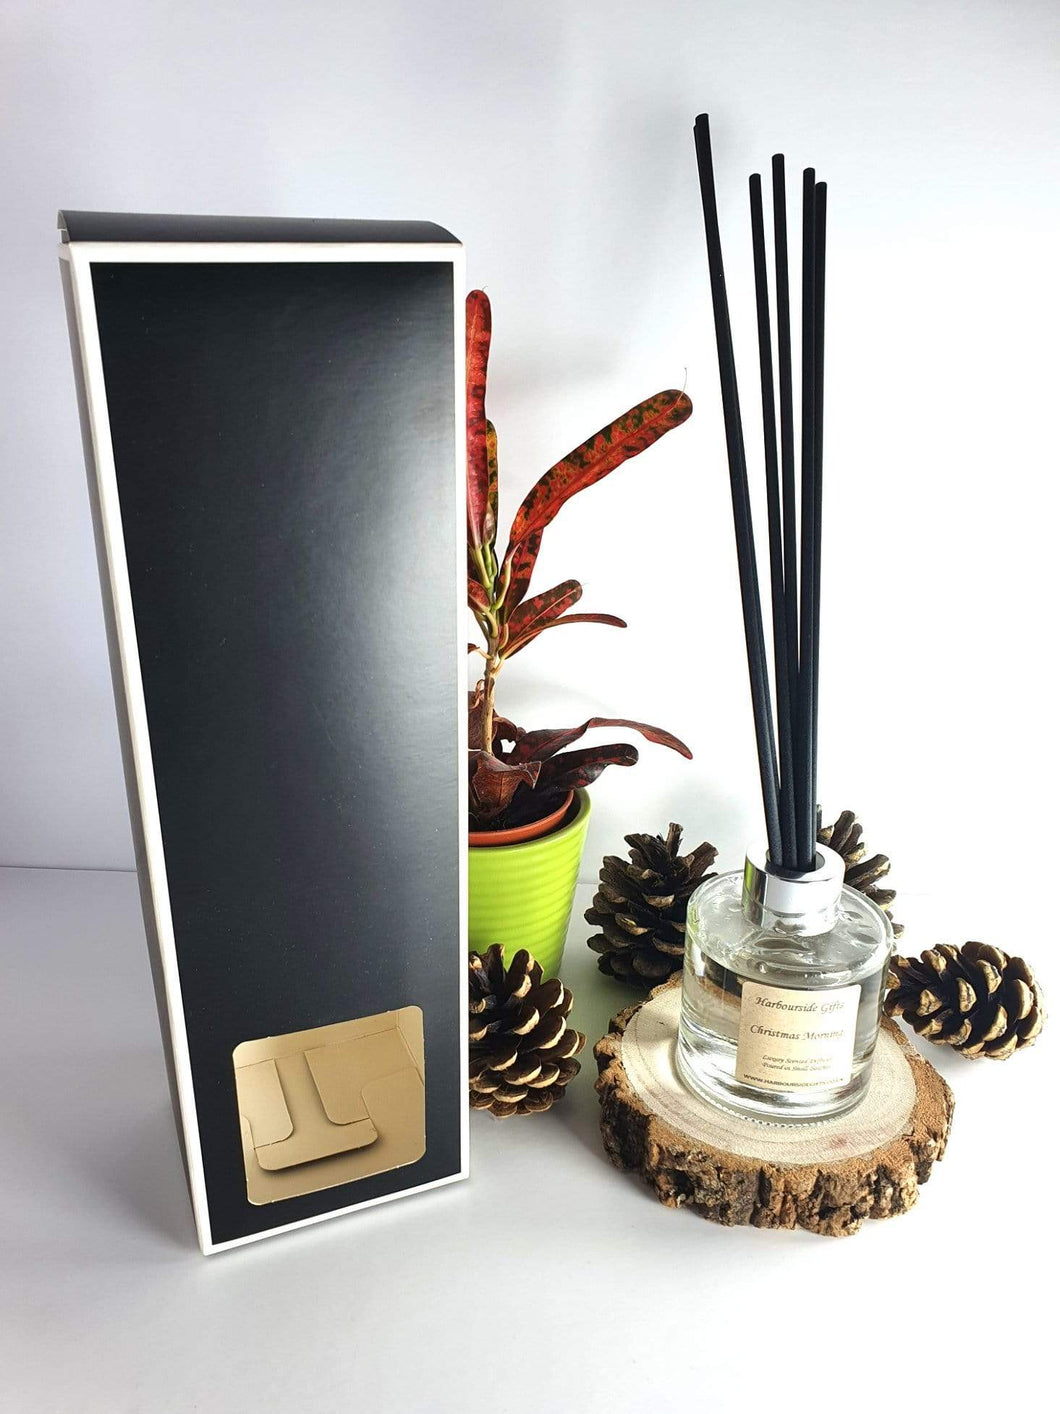 Christmas Morning Scent Reed Diffuser 100ml with 6 High Quality Reeds in a Gift Box CMORN100 Harbourside Gifts